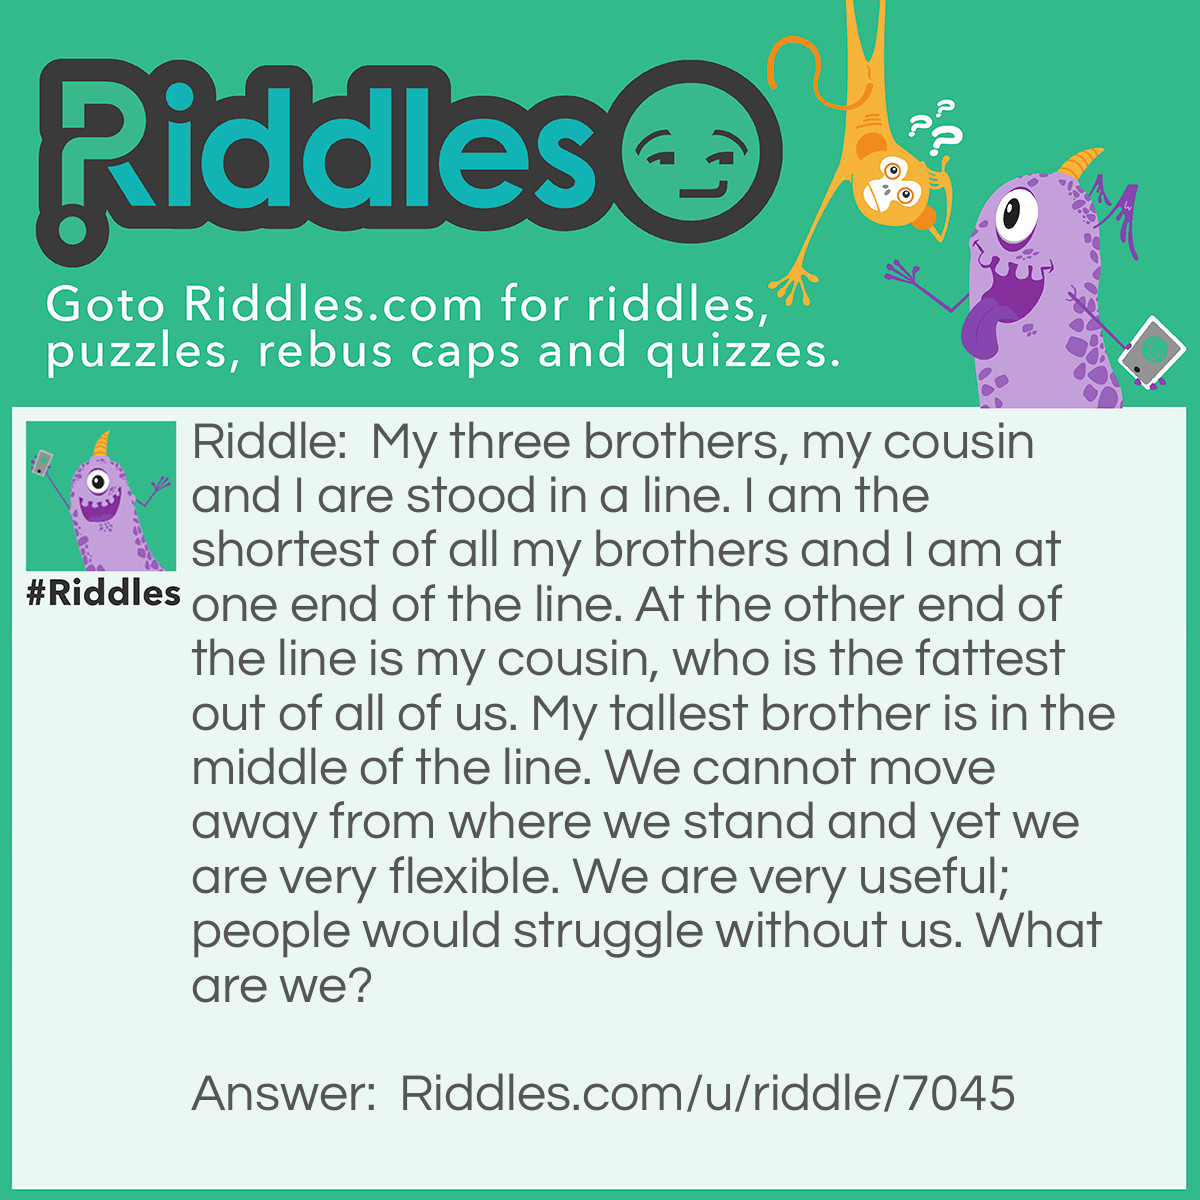 Riddle: My three brothers, my cousin and I are stood in a line. I am the shortest of all my brothers and I am at one end of the line. At the other end of the line is my cousin, who is the fattest out of all of us. My tallest brother is in the middle of the line. We cannot move away from where we stand and yet we are very flexible. We are very useful; people would struggle without us. What are we? Answer: Fingers.